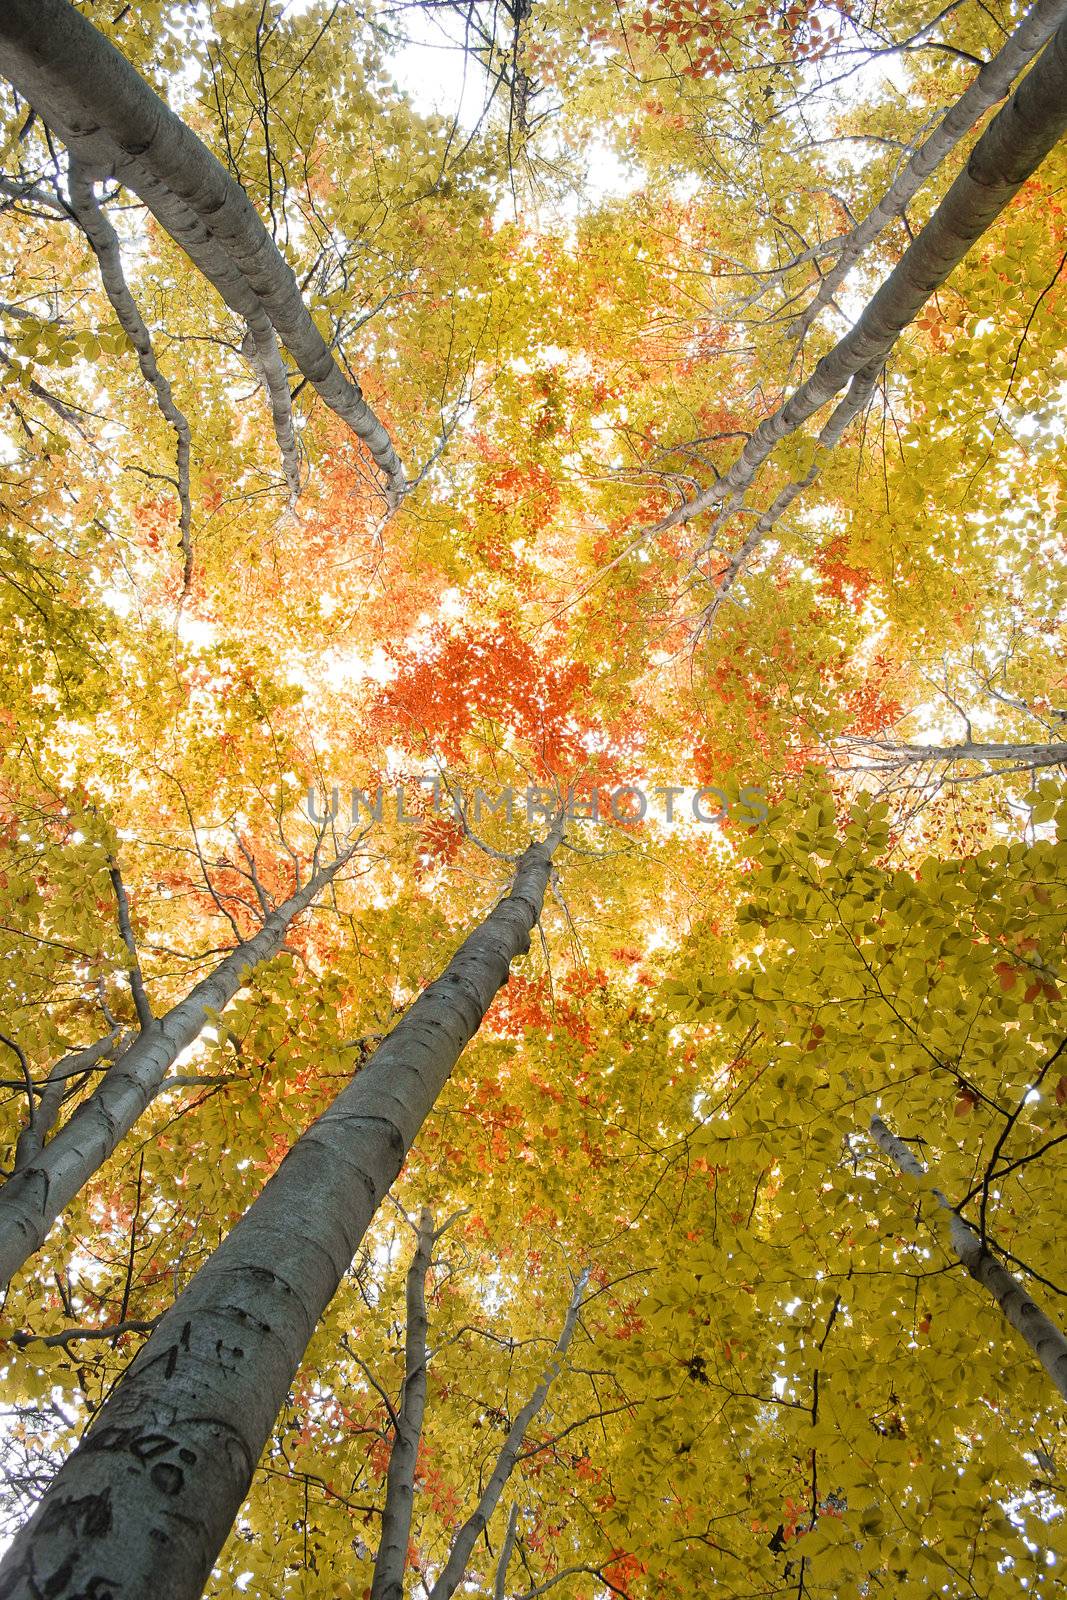 Trees in a forest in autumn with colored leaves